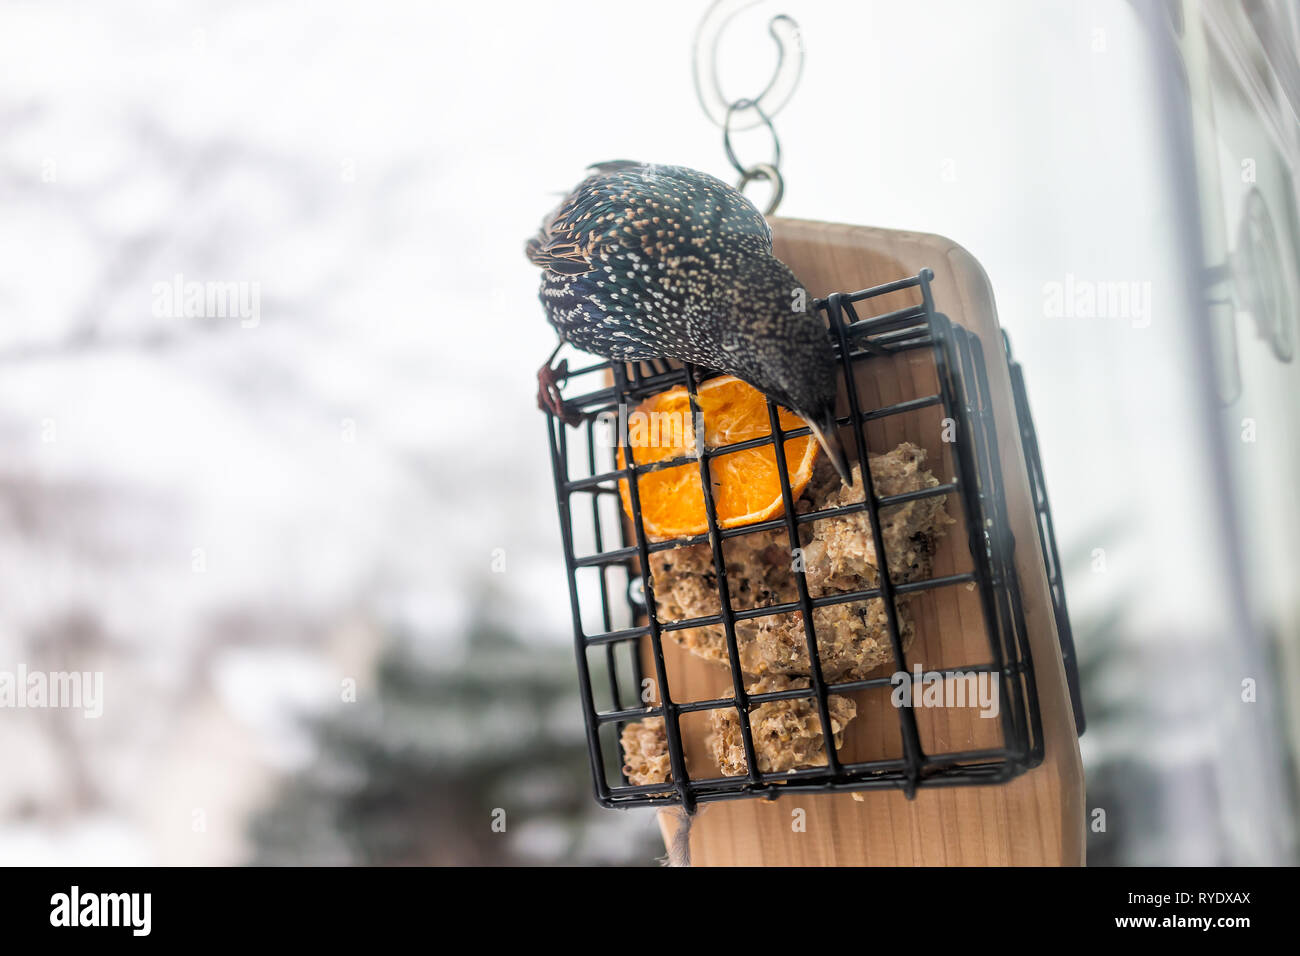 Closeup of European starling bird sitting perched on plastic suet feeder cage by window in Virginia eating with beak and orange half Stock Photo